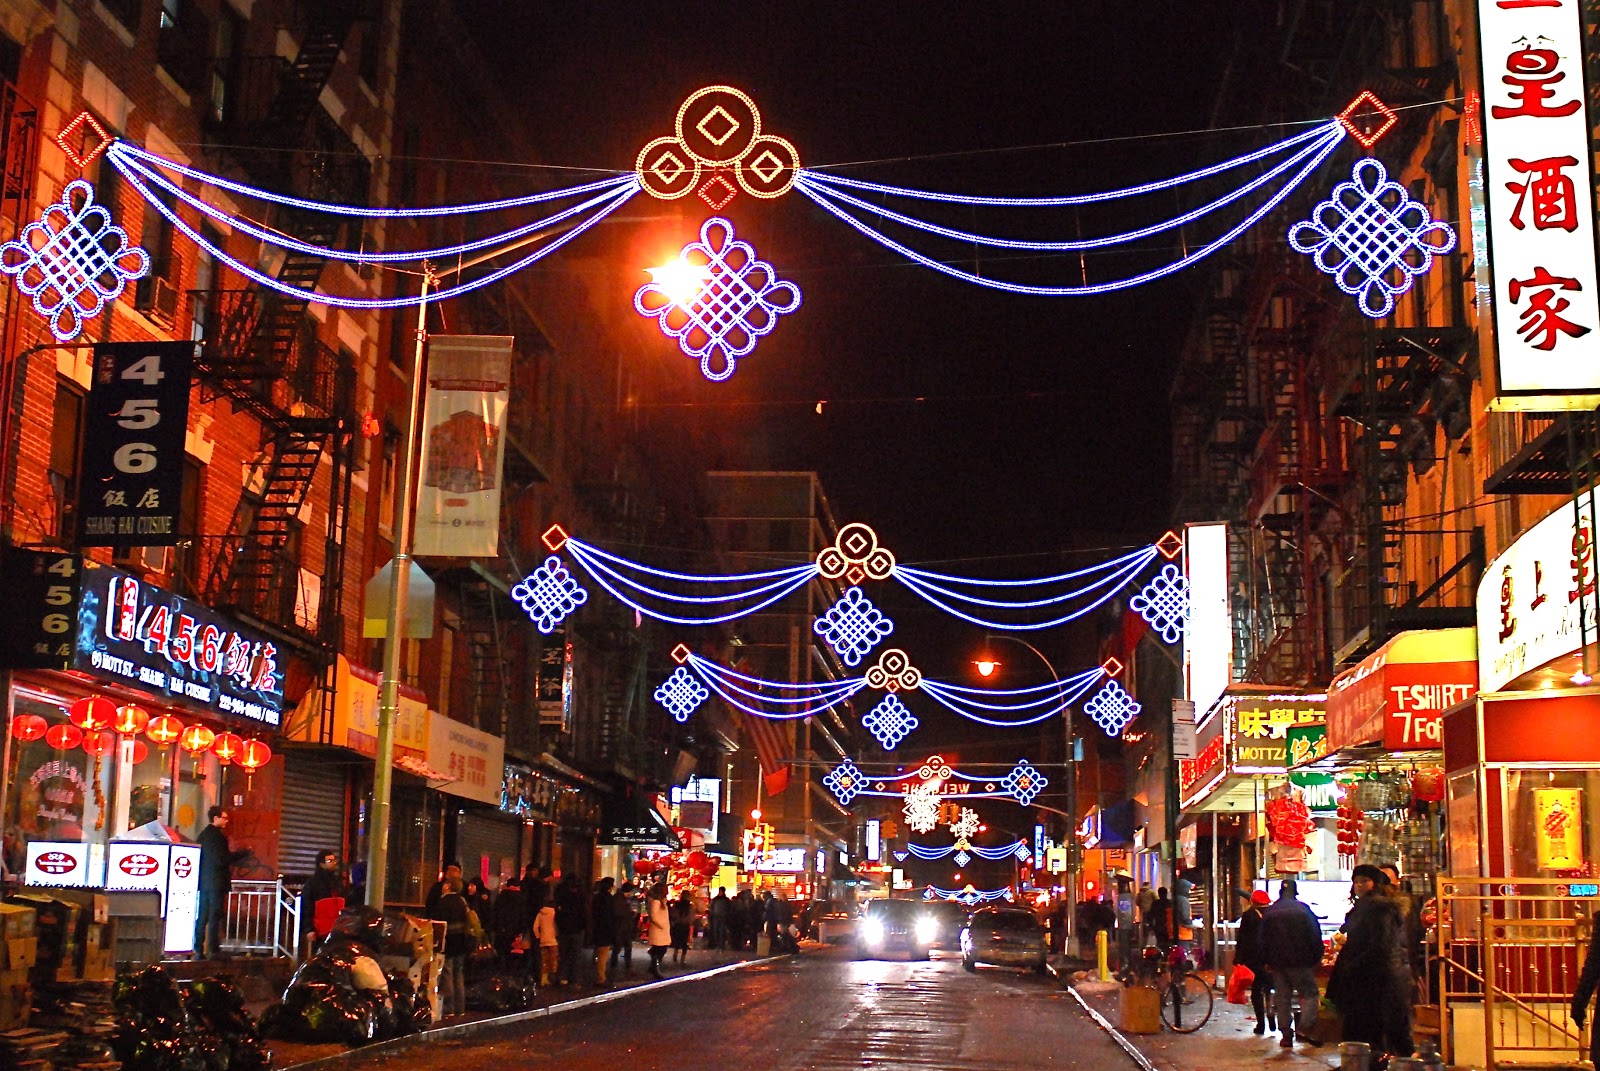 Colorful photos of Chinatown in New York City | BOOMSbeat